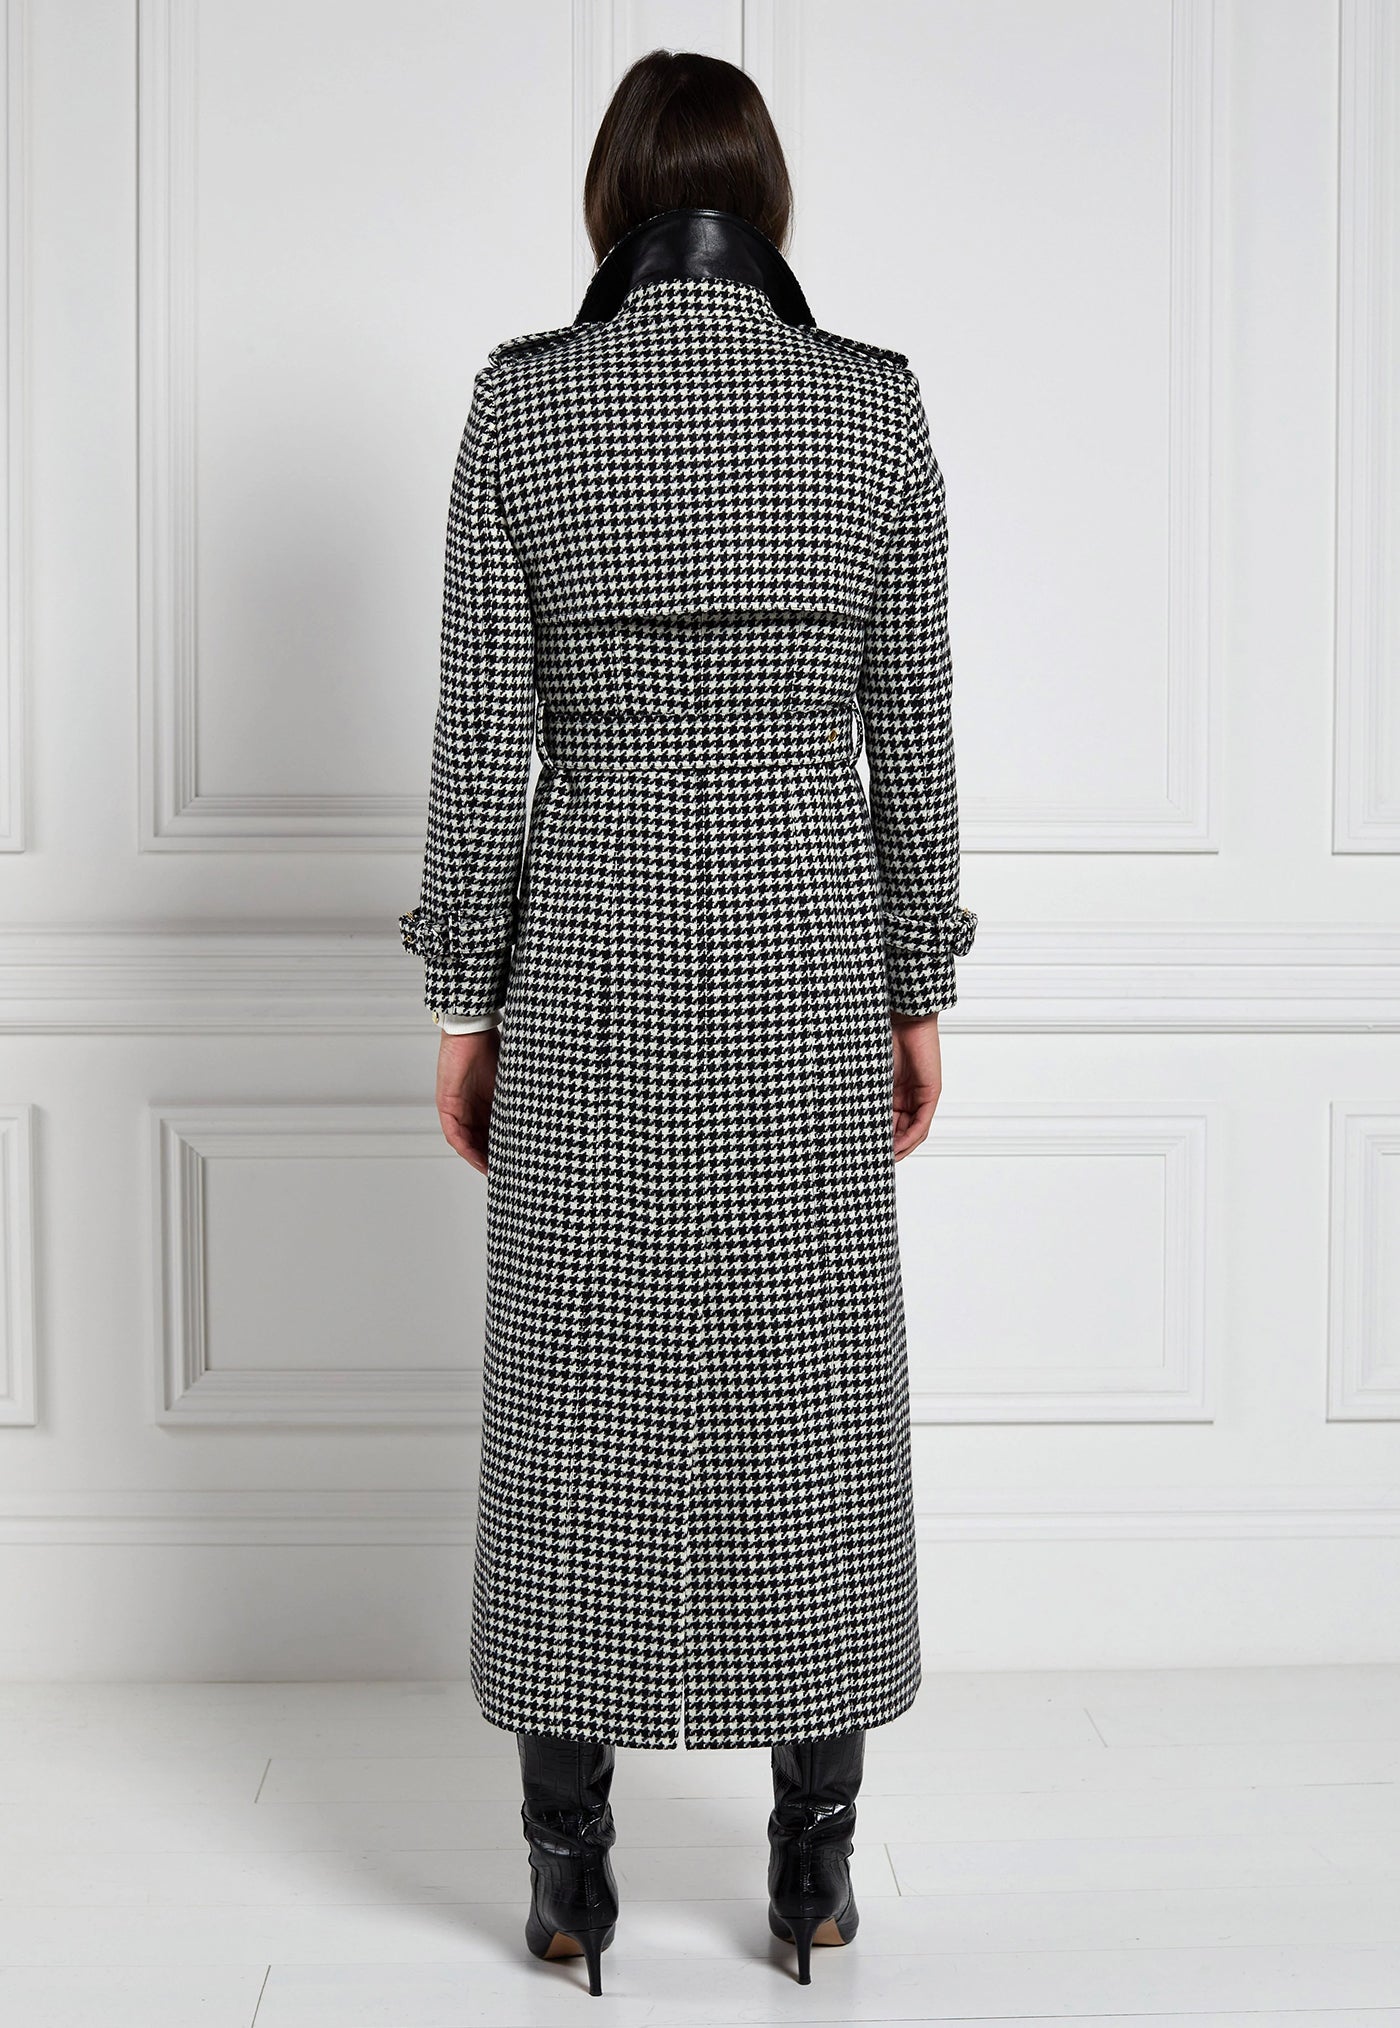 Marlborough Trench Coat Full Length - Houndstooth sold by Angel Divine